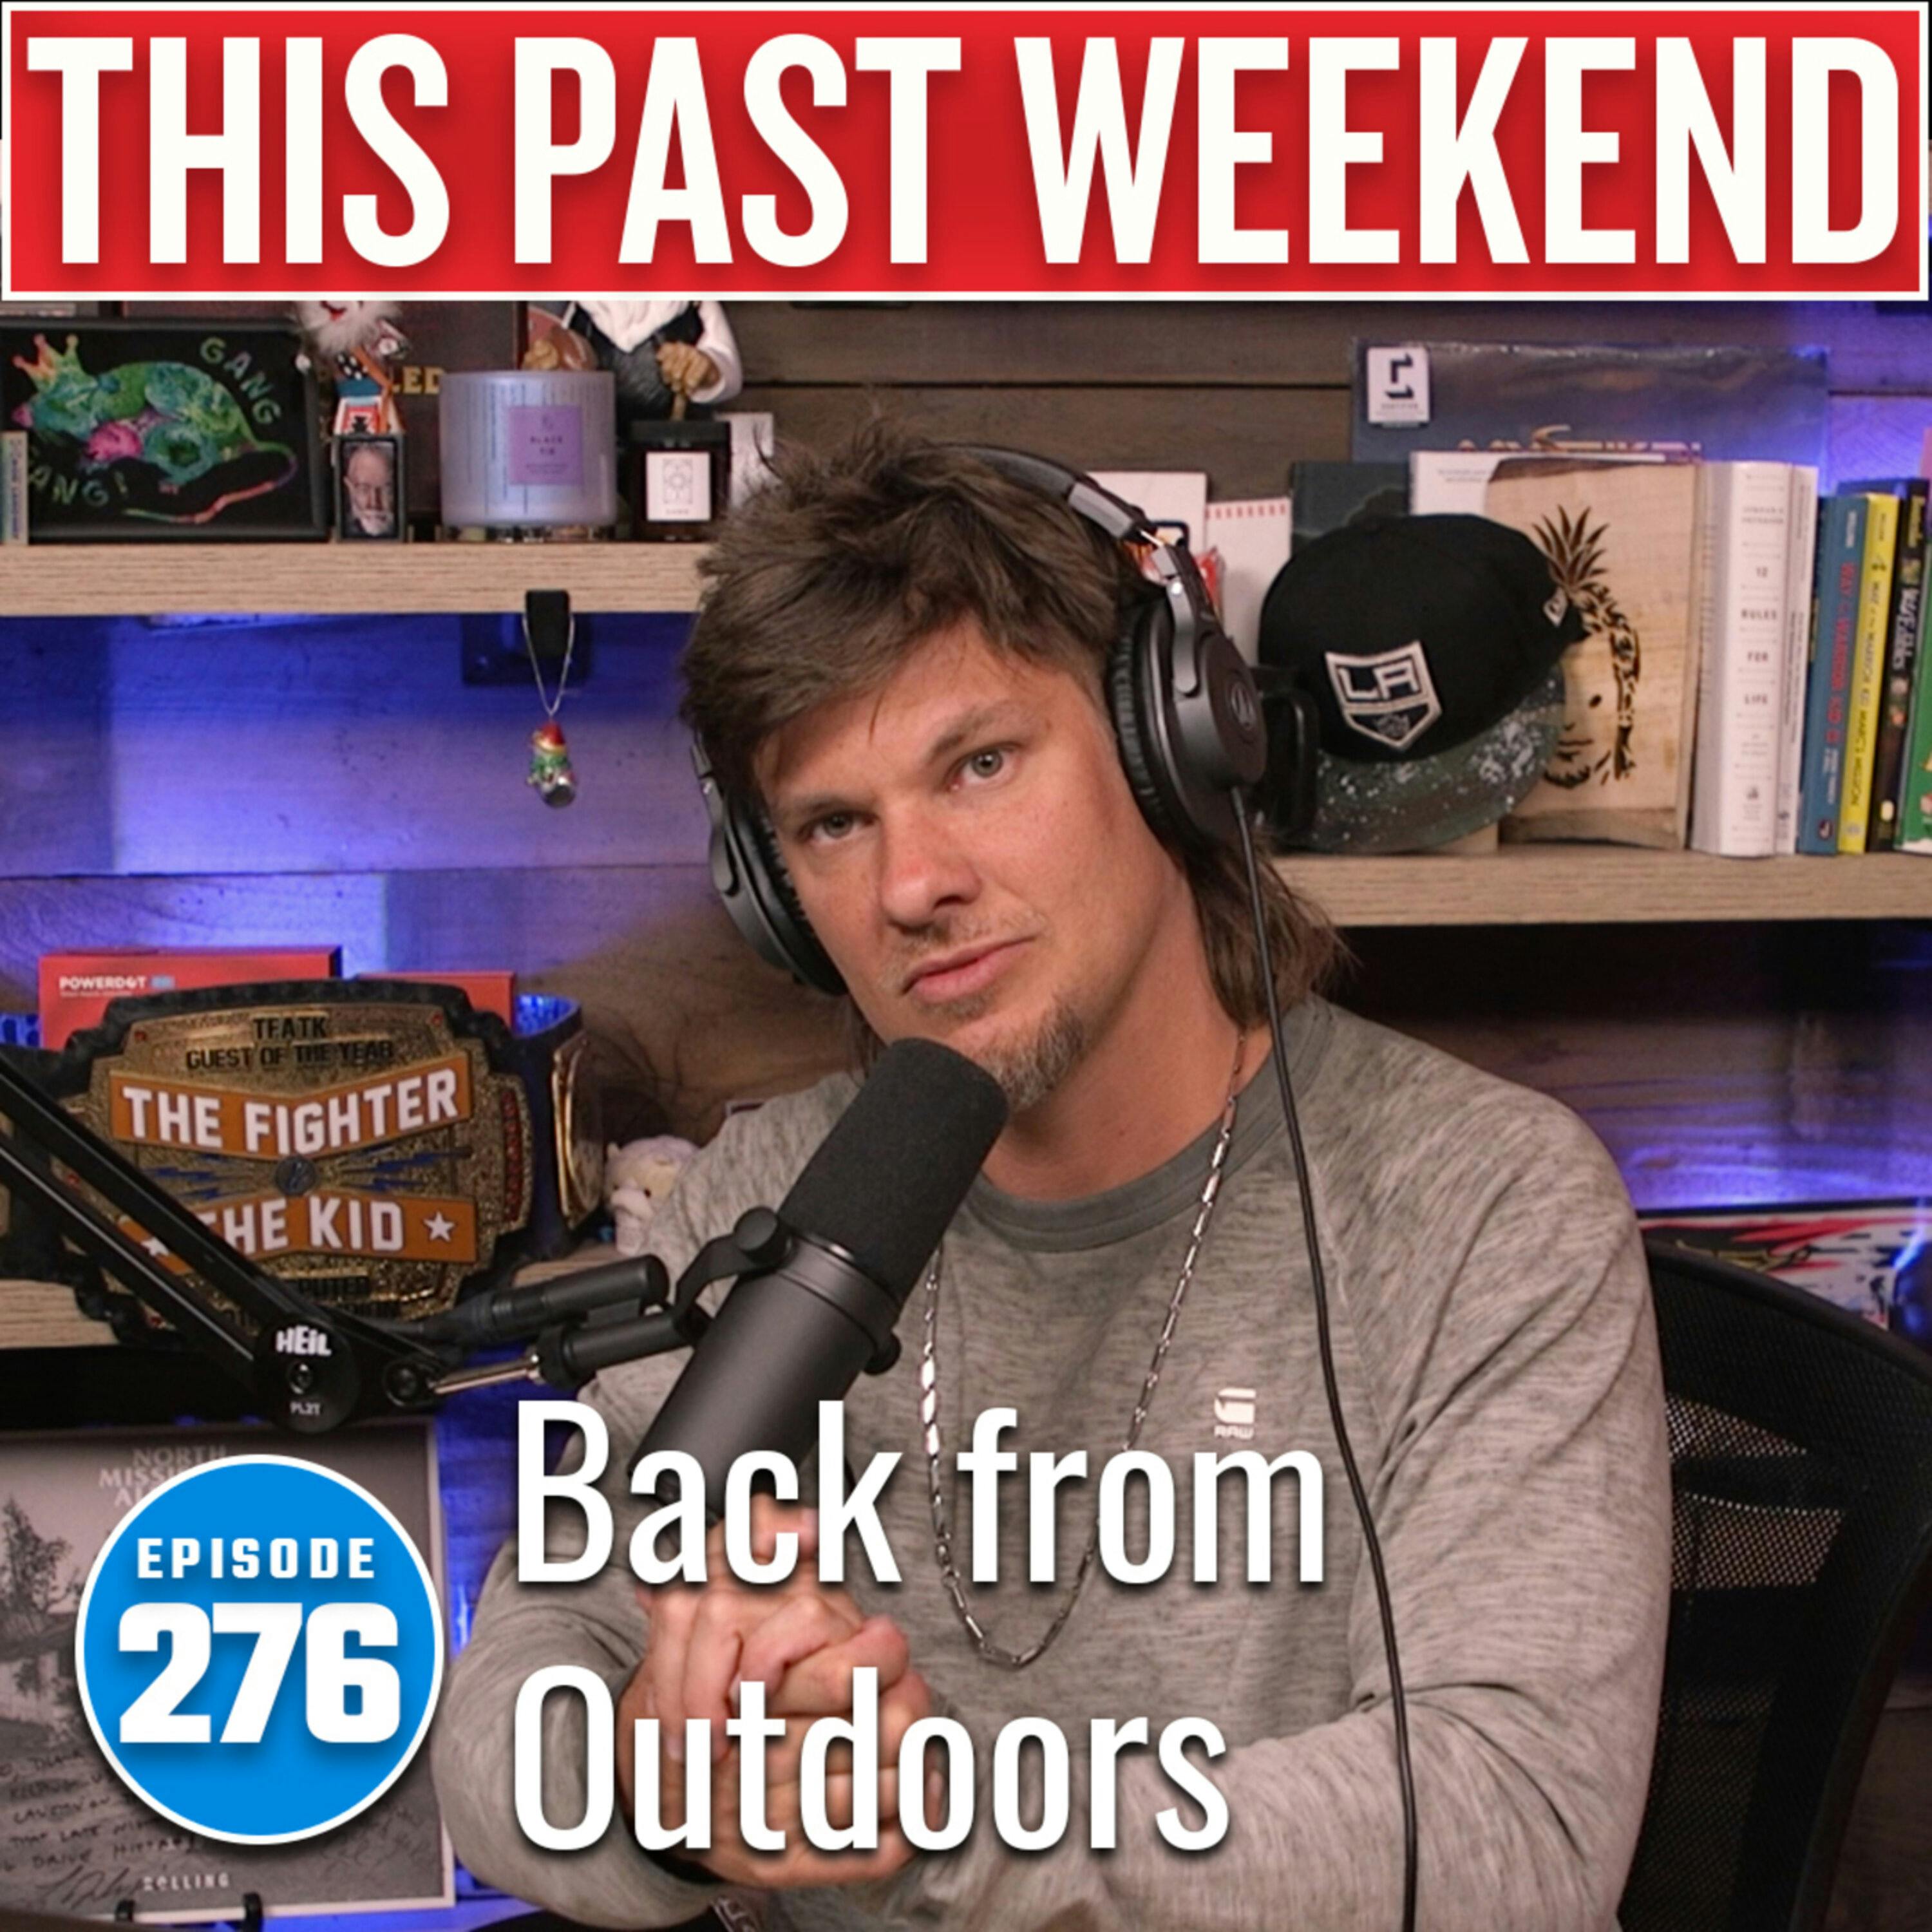 Back from Outdoors | This Past Weekend w/ Theo Von #276